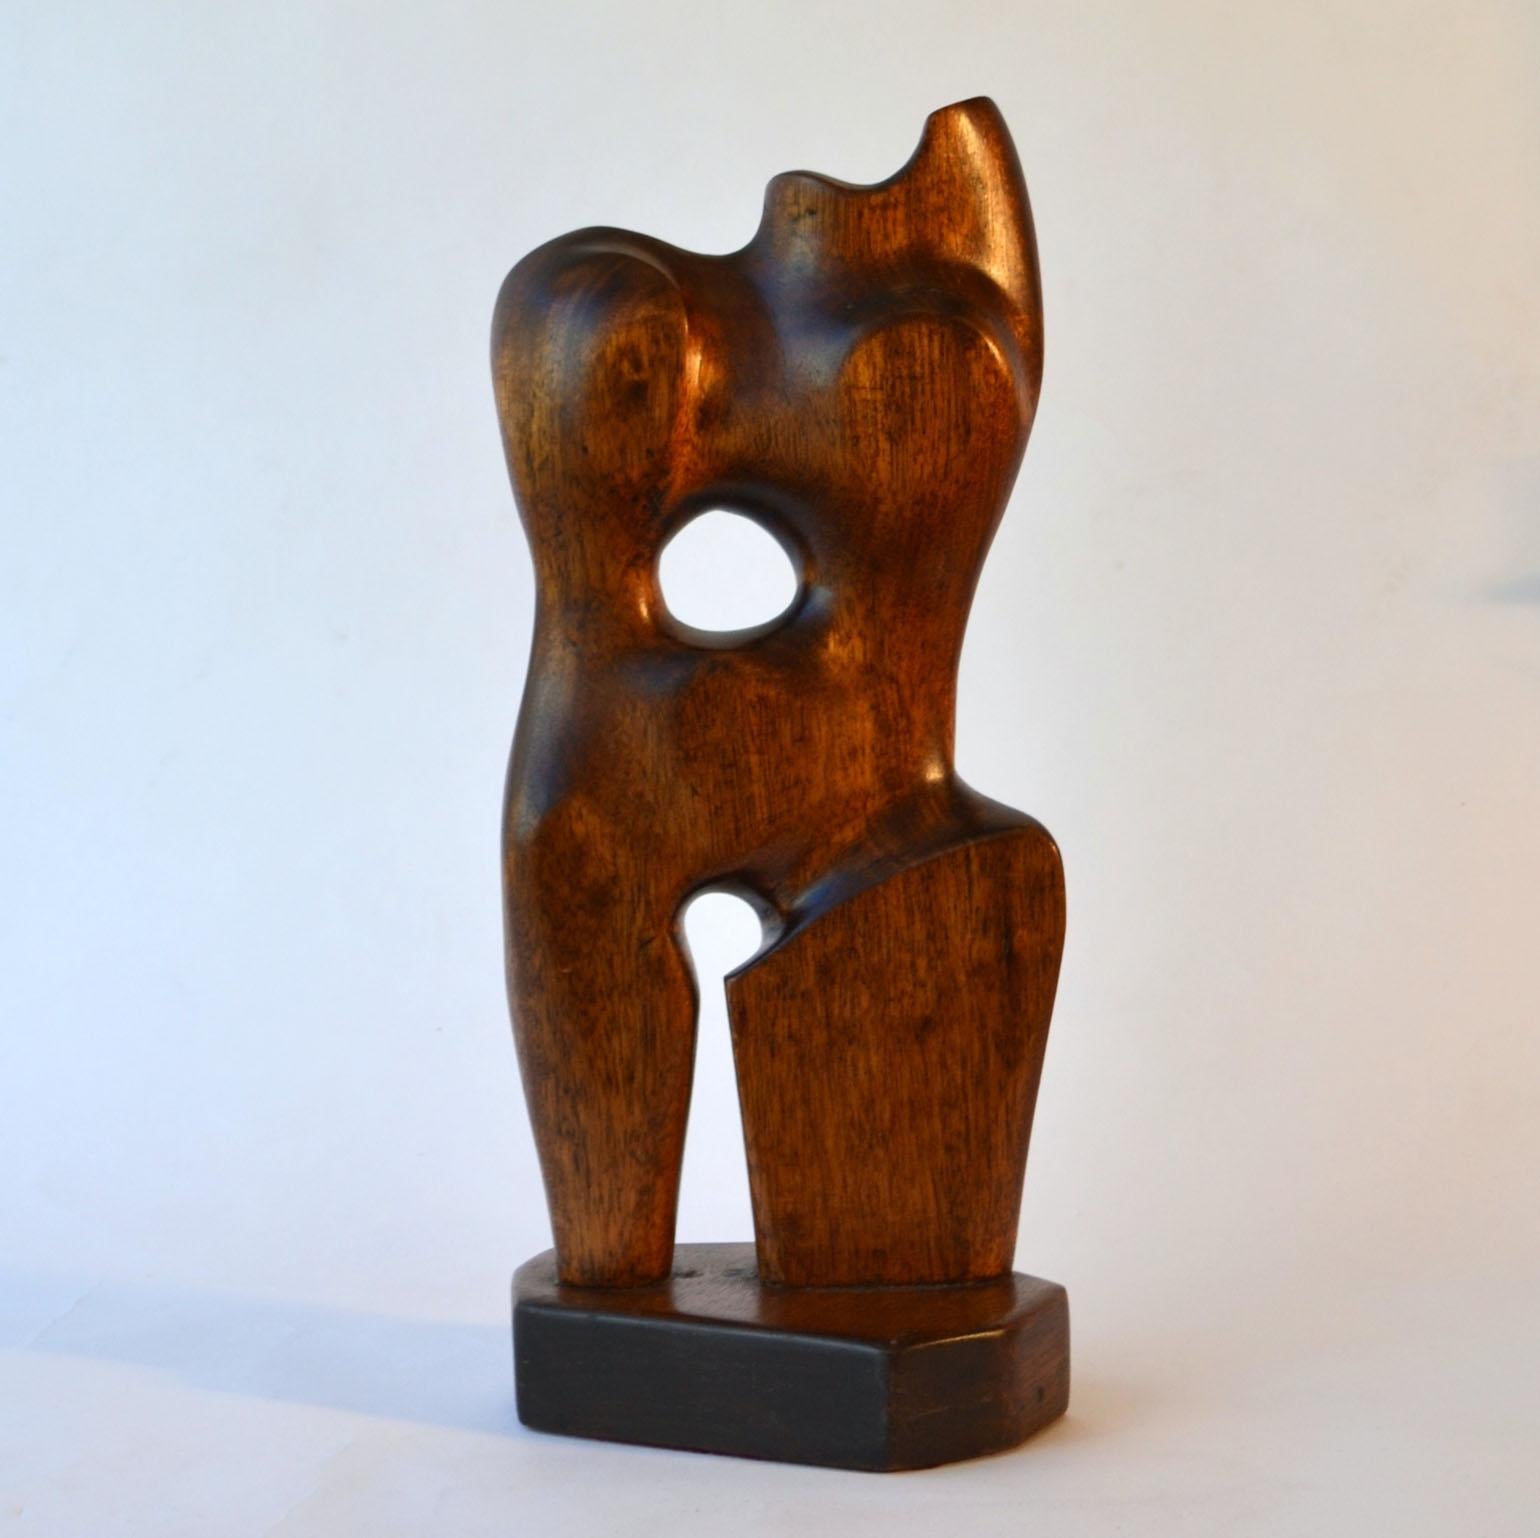 The hand carved mahogany female torso sculpture shows the influence of Jean Arp and Henry Moore. Reducing the human form to a simple abstract form, ejecting the rigid structure of straight lines and embracing biomorphic form through chance and